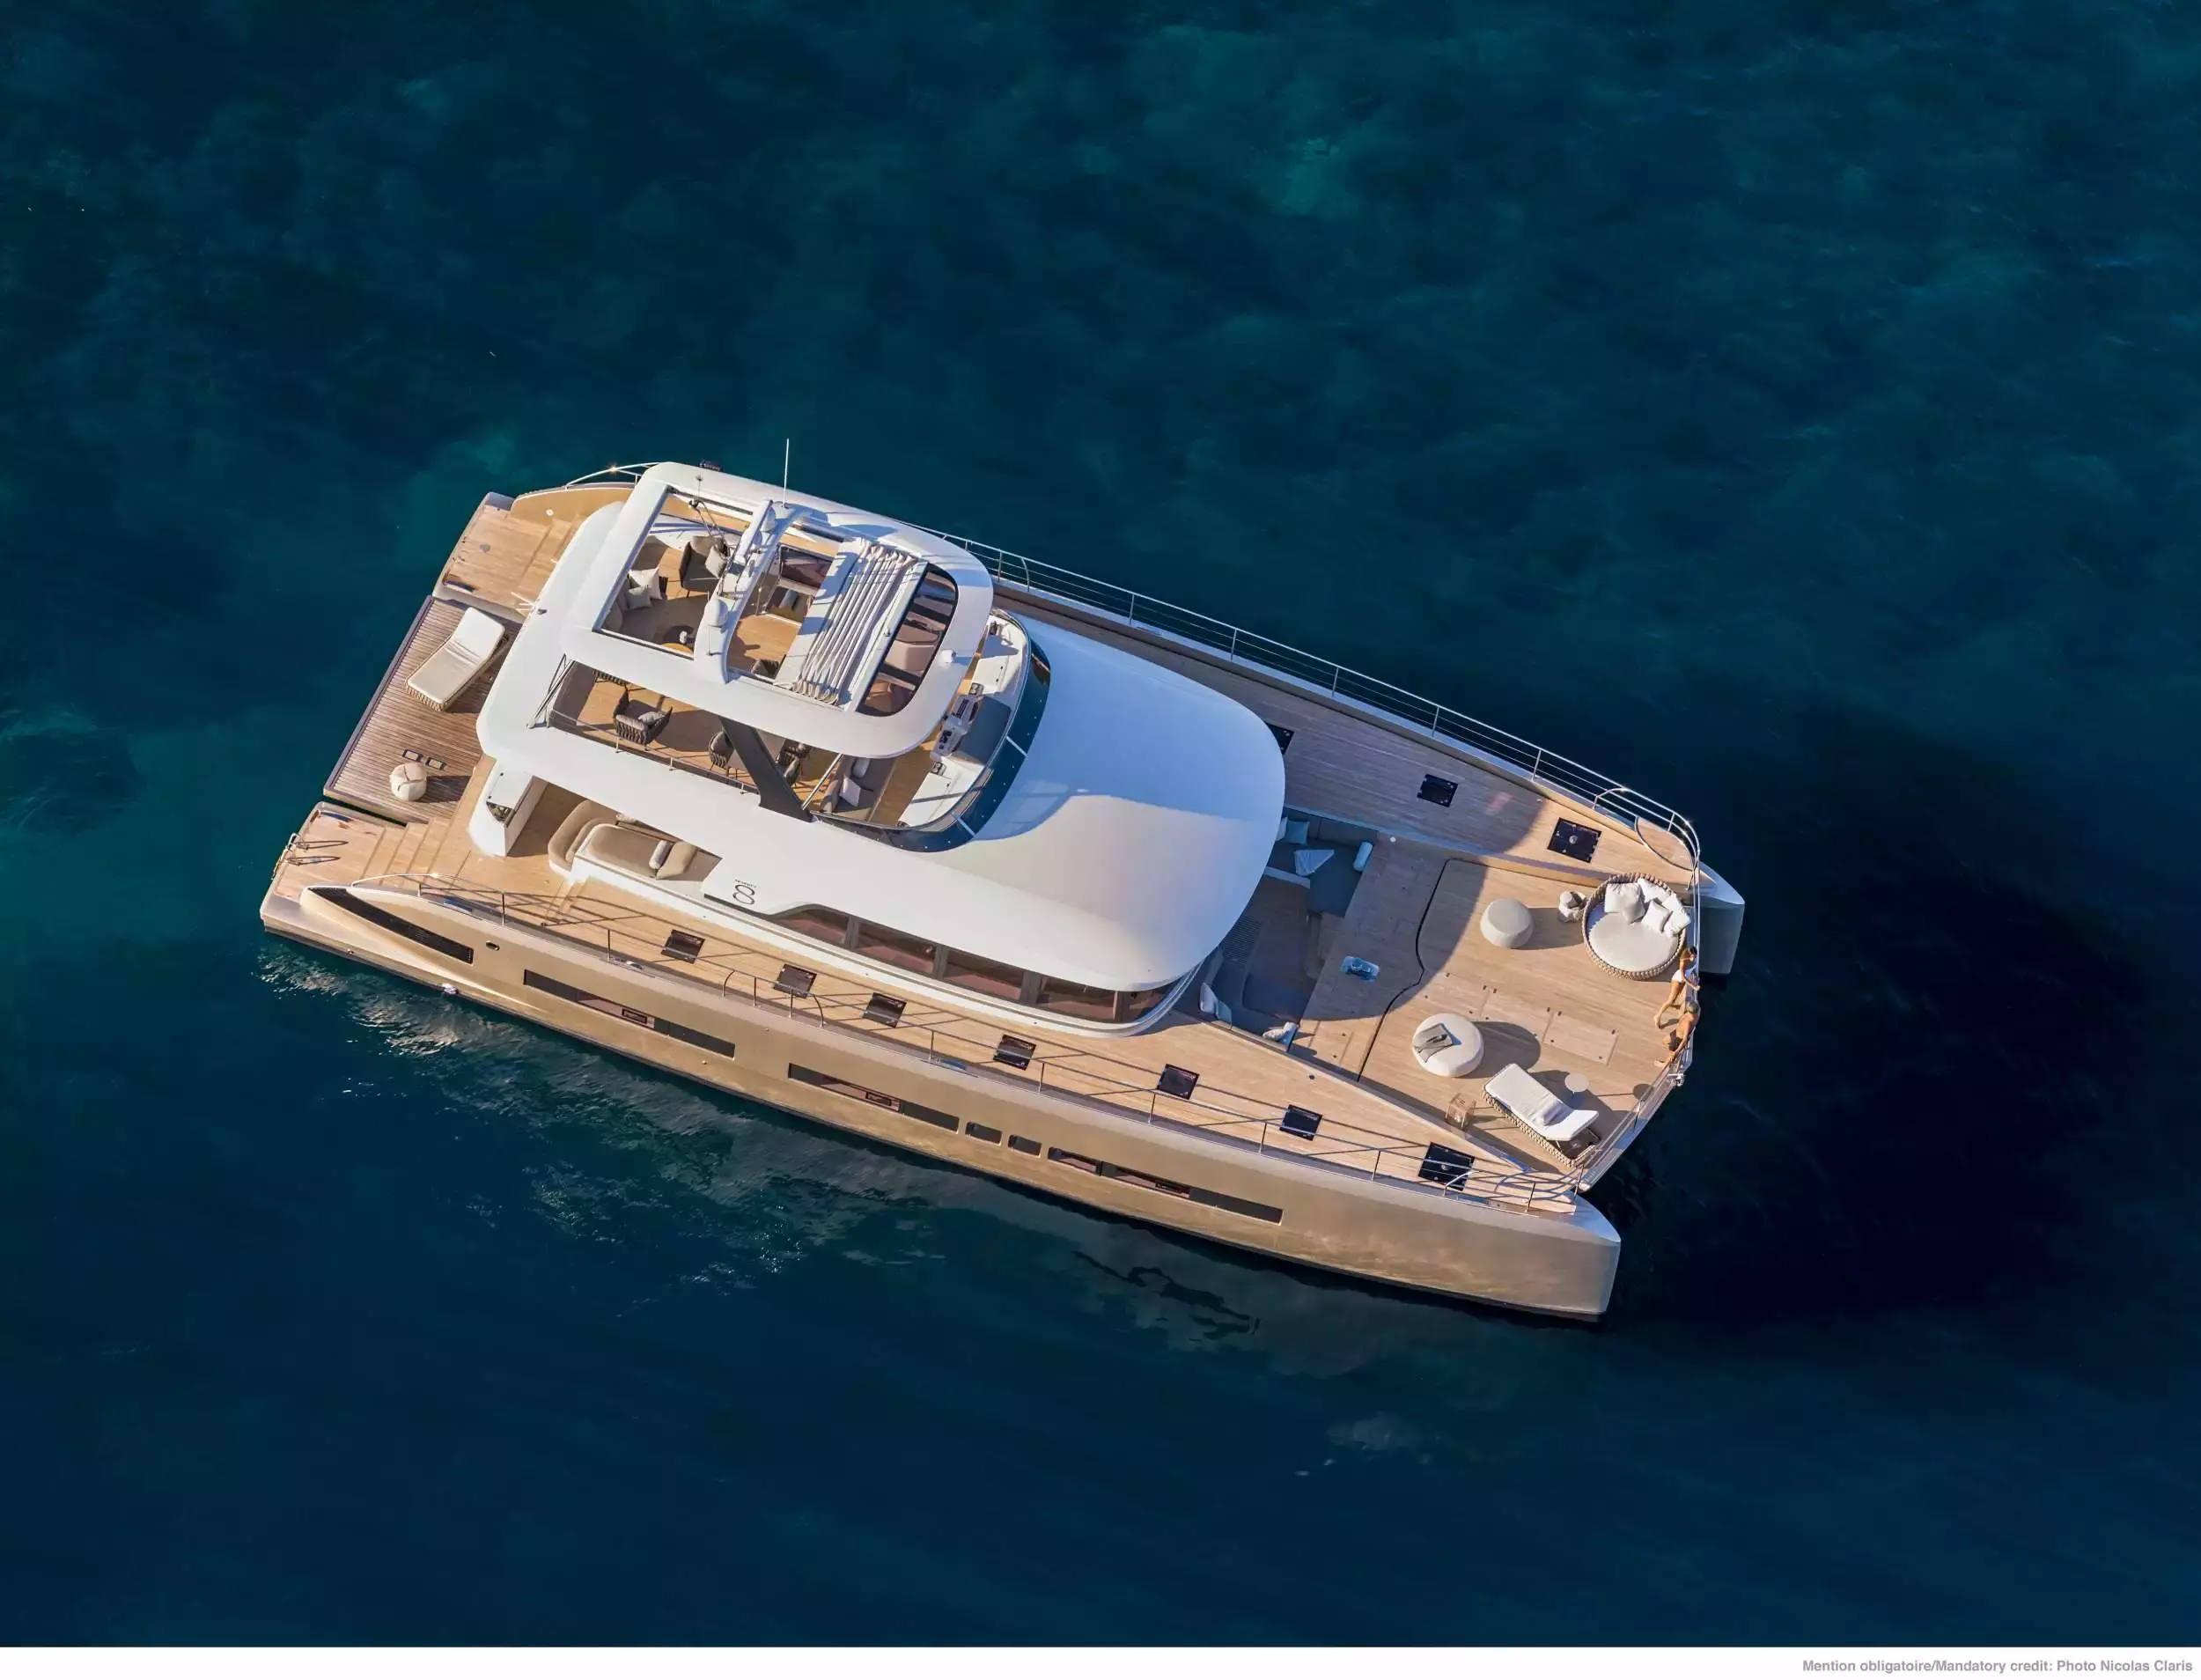 Siete Mares by Lagoon - Top rates for a Charter of a private Luxury Catamaran in US Virgin Islands